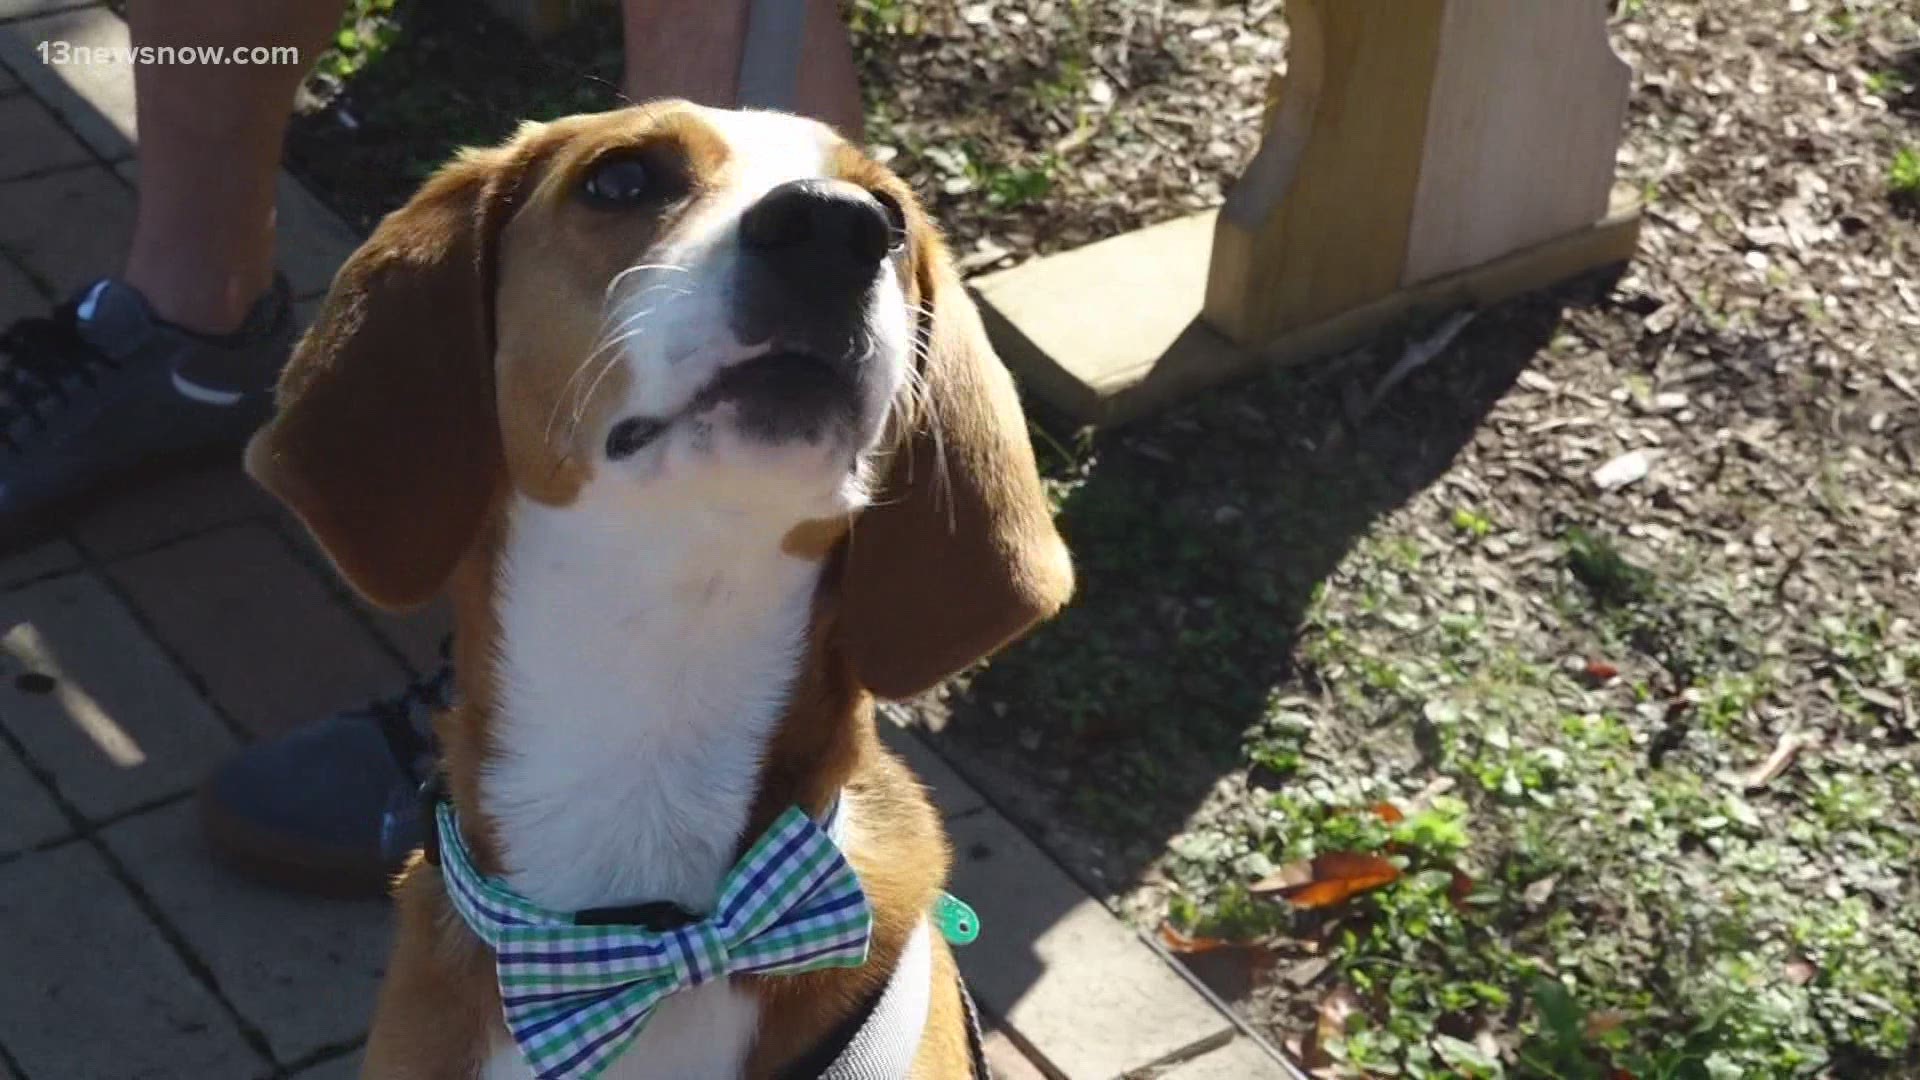 Monty is a hound who came to the Chesapeake Humane Society as a stray. He's been waiting to find a permanent home for about a year.